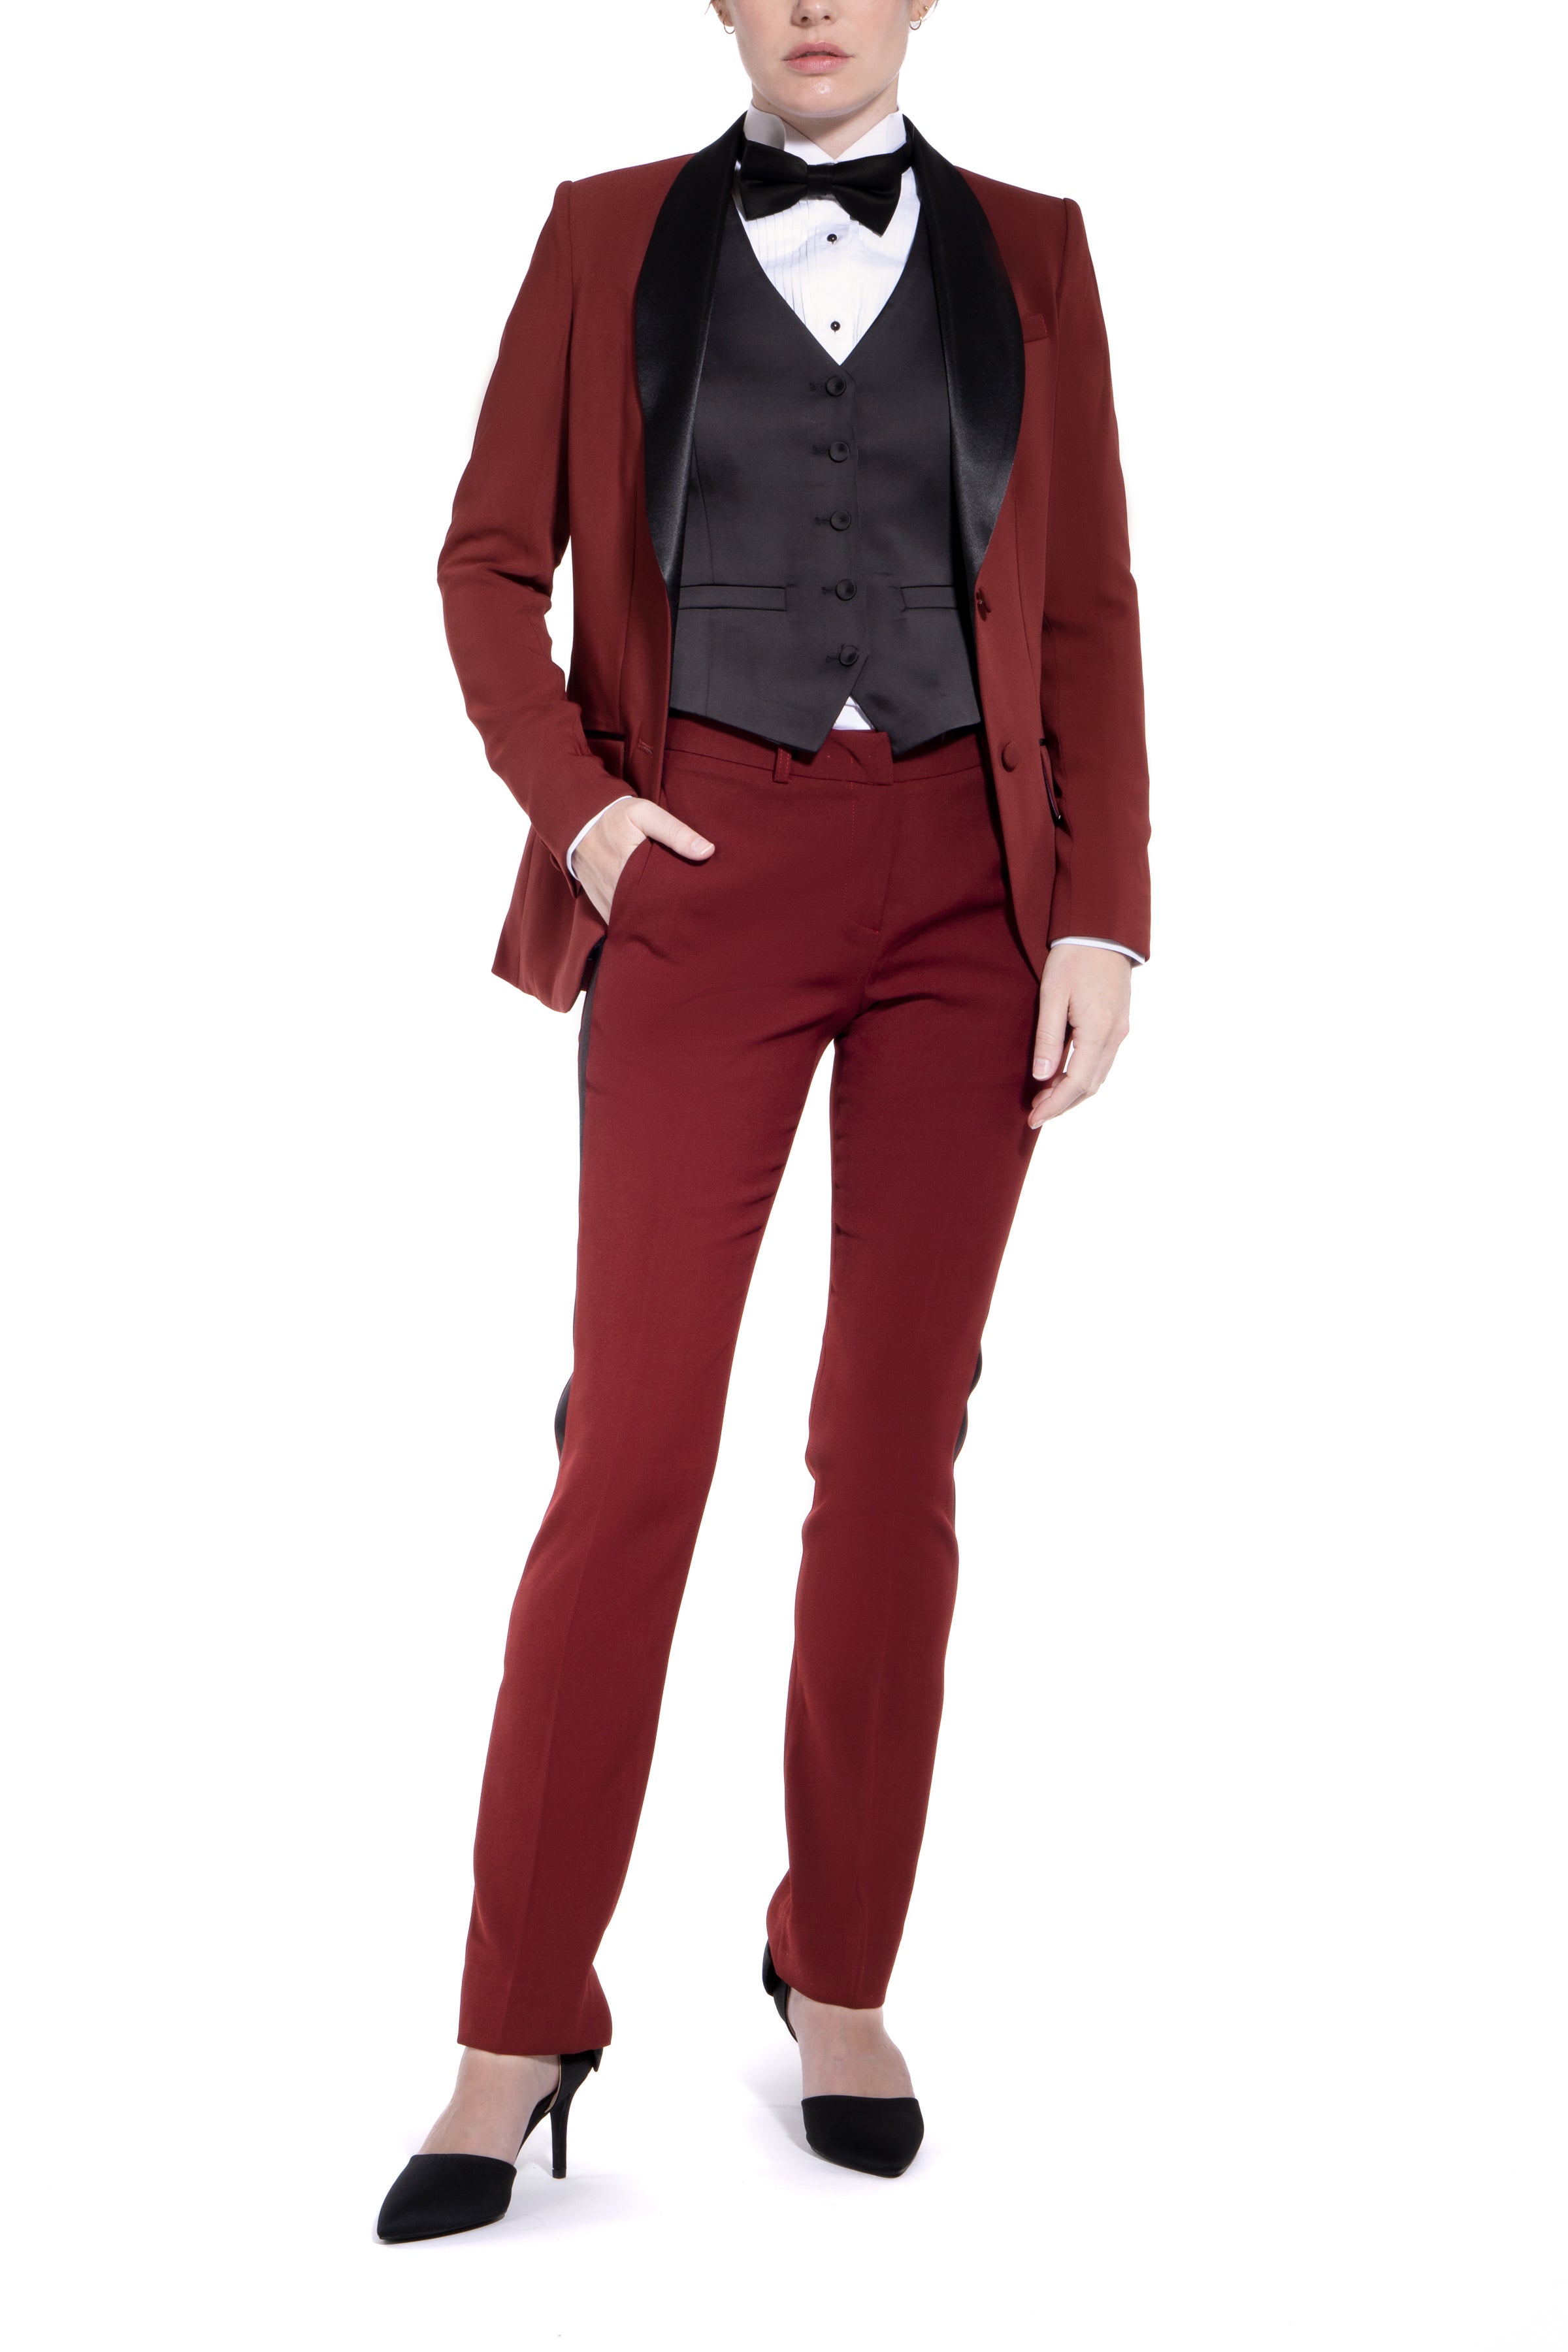 Twisted Tailor Draco Plus skinny suit pants in burgundy - ShopStyle